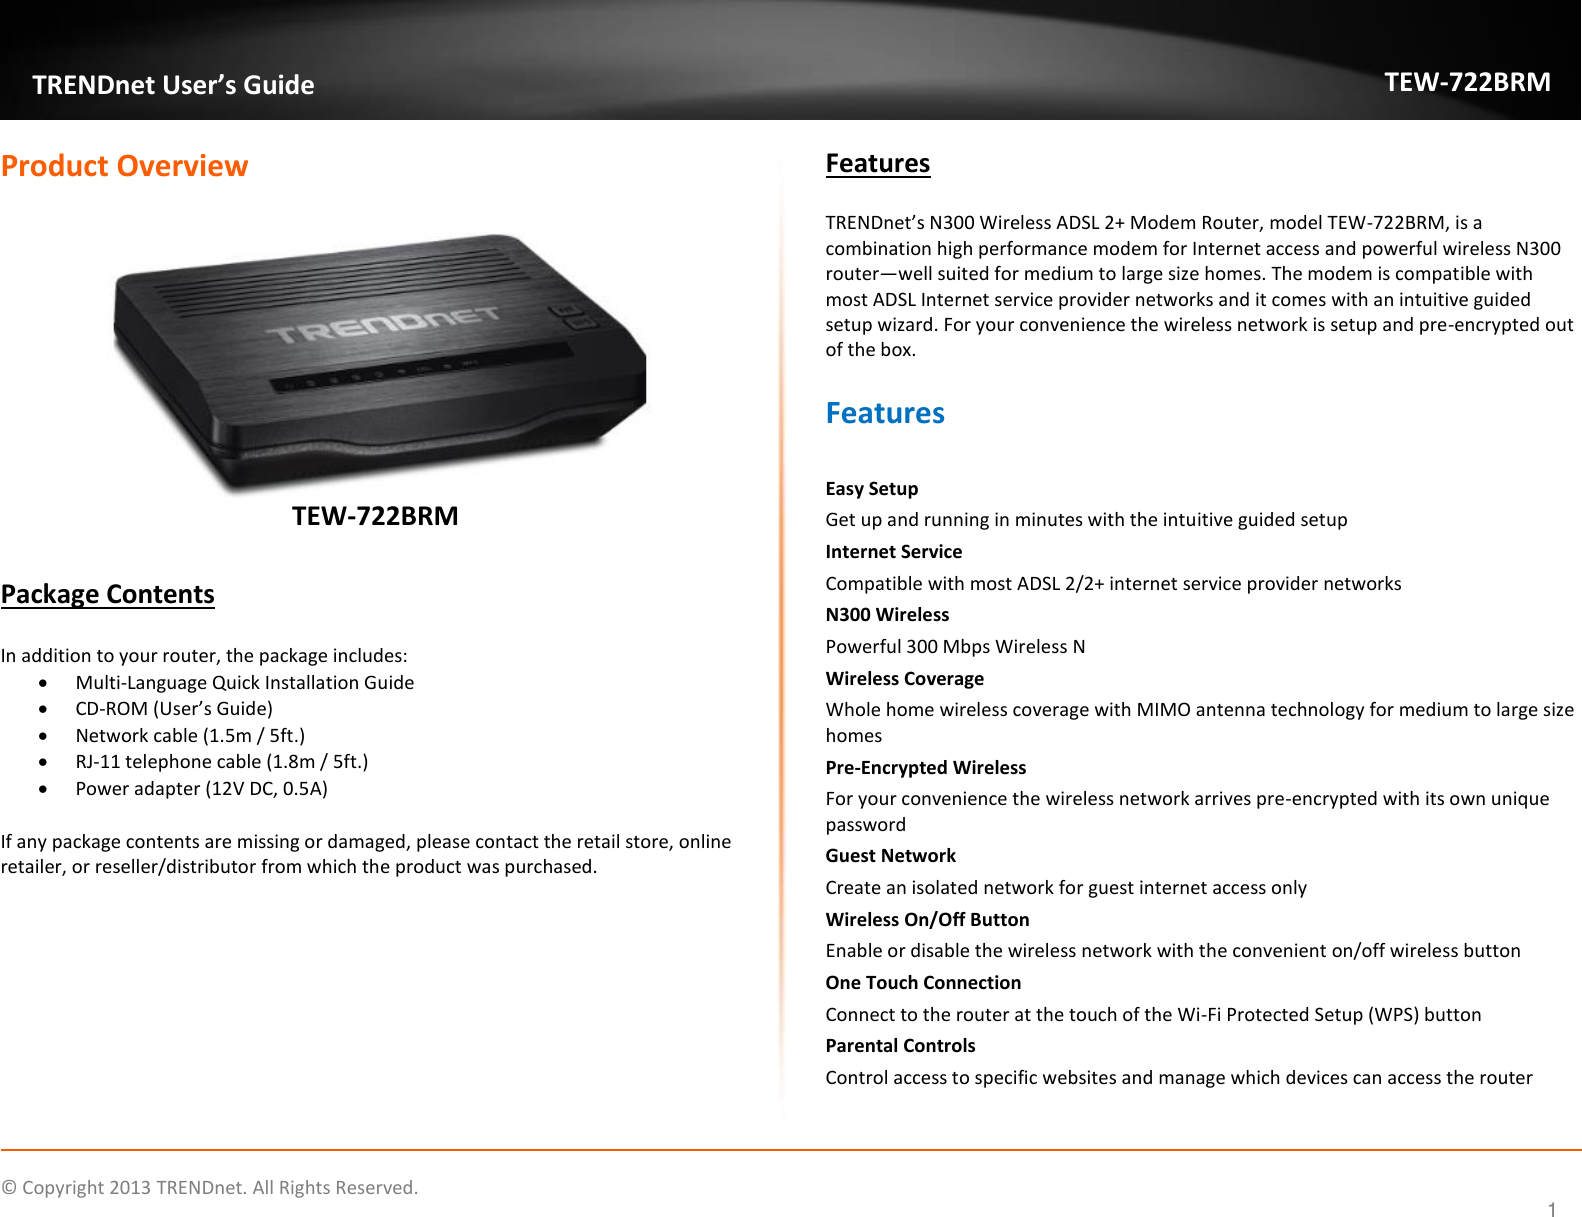             © Copyright 2013 TRENDnet. All Rights Reserved.       TRENDnet User’s Guide TEW-722BRM 1 Product Overview   TEW-722BRM  Package Contents  In addition to your router, the package includes:  Multi-Language Quick Installation Guide  CD-ROM (User’s Guide)  Network cable (1.5m / 5ft.)  RJ-11 telephone cable (1.8m / 5ft.)  Power adapter (12V DC, 0.5A)  If any package contents are missing or damaged, please contact the retail store, online retailer, or reseller/distributor from which the product was purchased. Features TRENDnet’s N300 Wireless ADSL 2+ Modem Router, model TEW-722BRM, is a combination high performance modem for Internet access and powerful wireless N300 router—well suited for medium to large size homes. The modem is compatible with most ADSL Internet service provider networks and it comes with an intuitive guided setup wizard. For your convenience the wireless network is setup and pre-encrypted out of the box. Features  Easy Setup Get up and running in minutes with the intuitive guided setup Internet Service  Compatible with most ADSL 2/2+ internet service provider networks  N300 Wireless Powerful 300 Mbps Wireless N Wireless Coverage Whole home wireless coverage with MIMO antenna technology for medium to large size homes Pre-Encrypted Wireless  For your convenience the wireless network arrives pre-encrypted with its own unique password Guest Network Create an isolated network for guest internet access only Wireless On/Off Button Enable or disable the wireless network with the convenient on/off wireless button  One Touch Connection Connect to the router at the touch of the Wi-Fi Protected Setup (WPS) button Parental Controls Control access to specific websites and manage which devices can access the router  